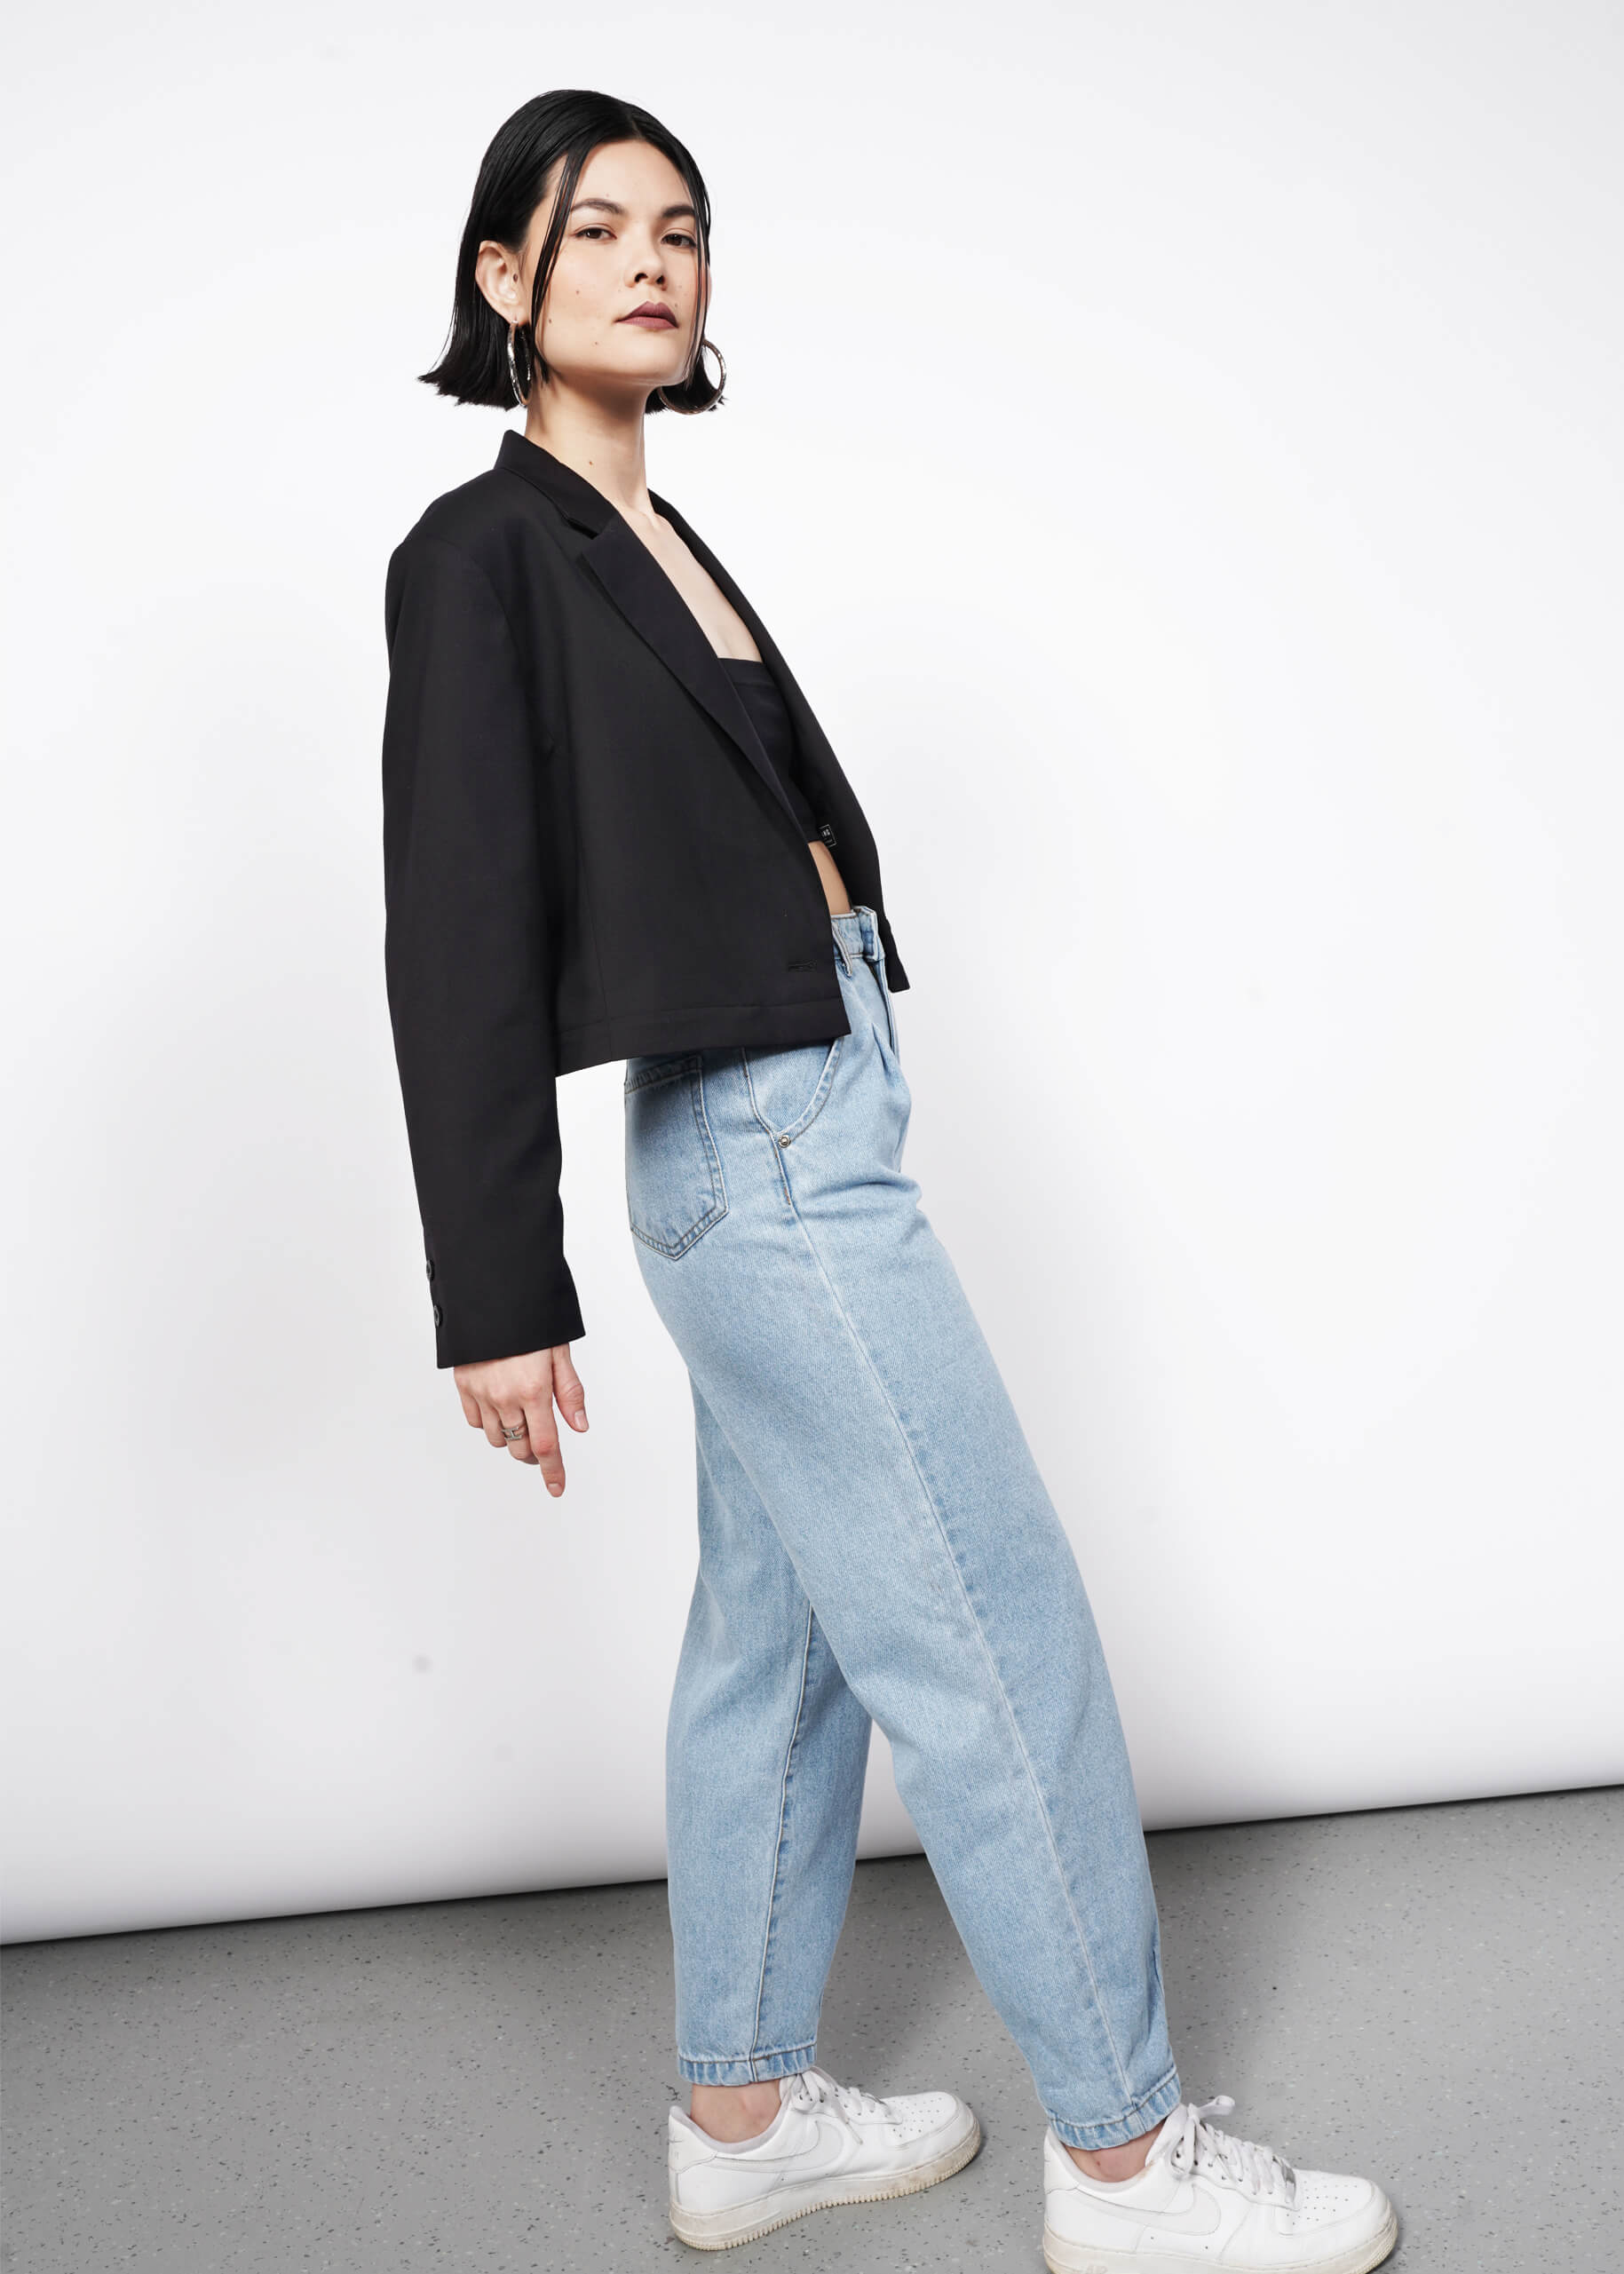 The Empower Cropped Convertible Blazer